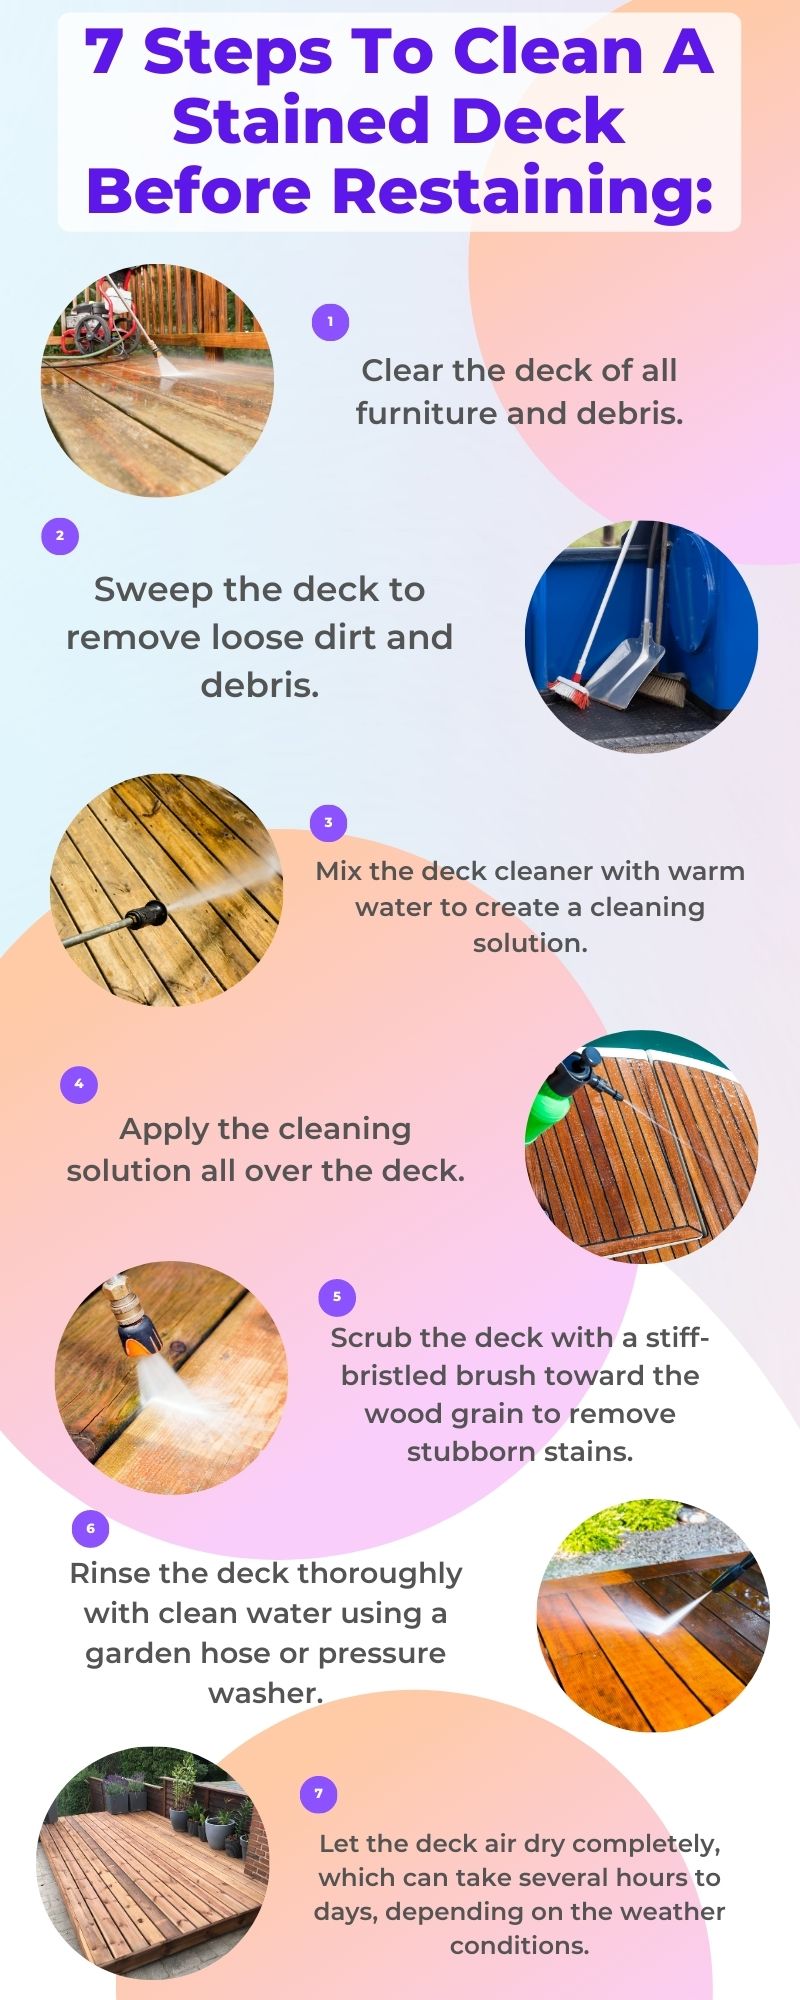 7 Steps To Clean A Stained Deck Before Restaining: